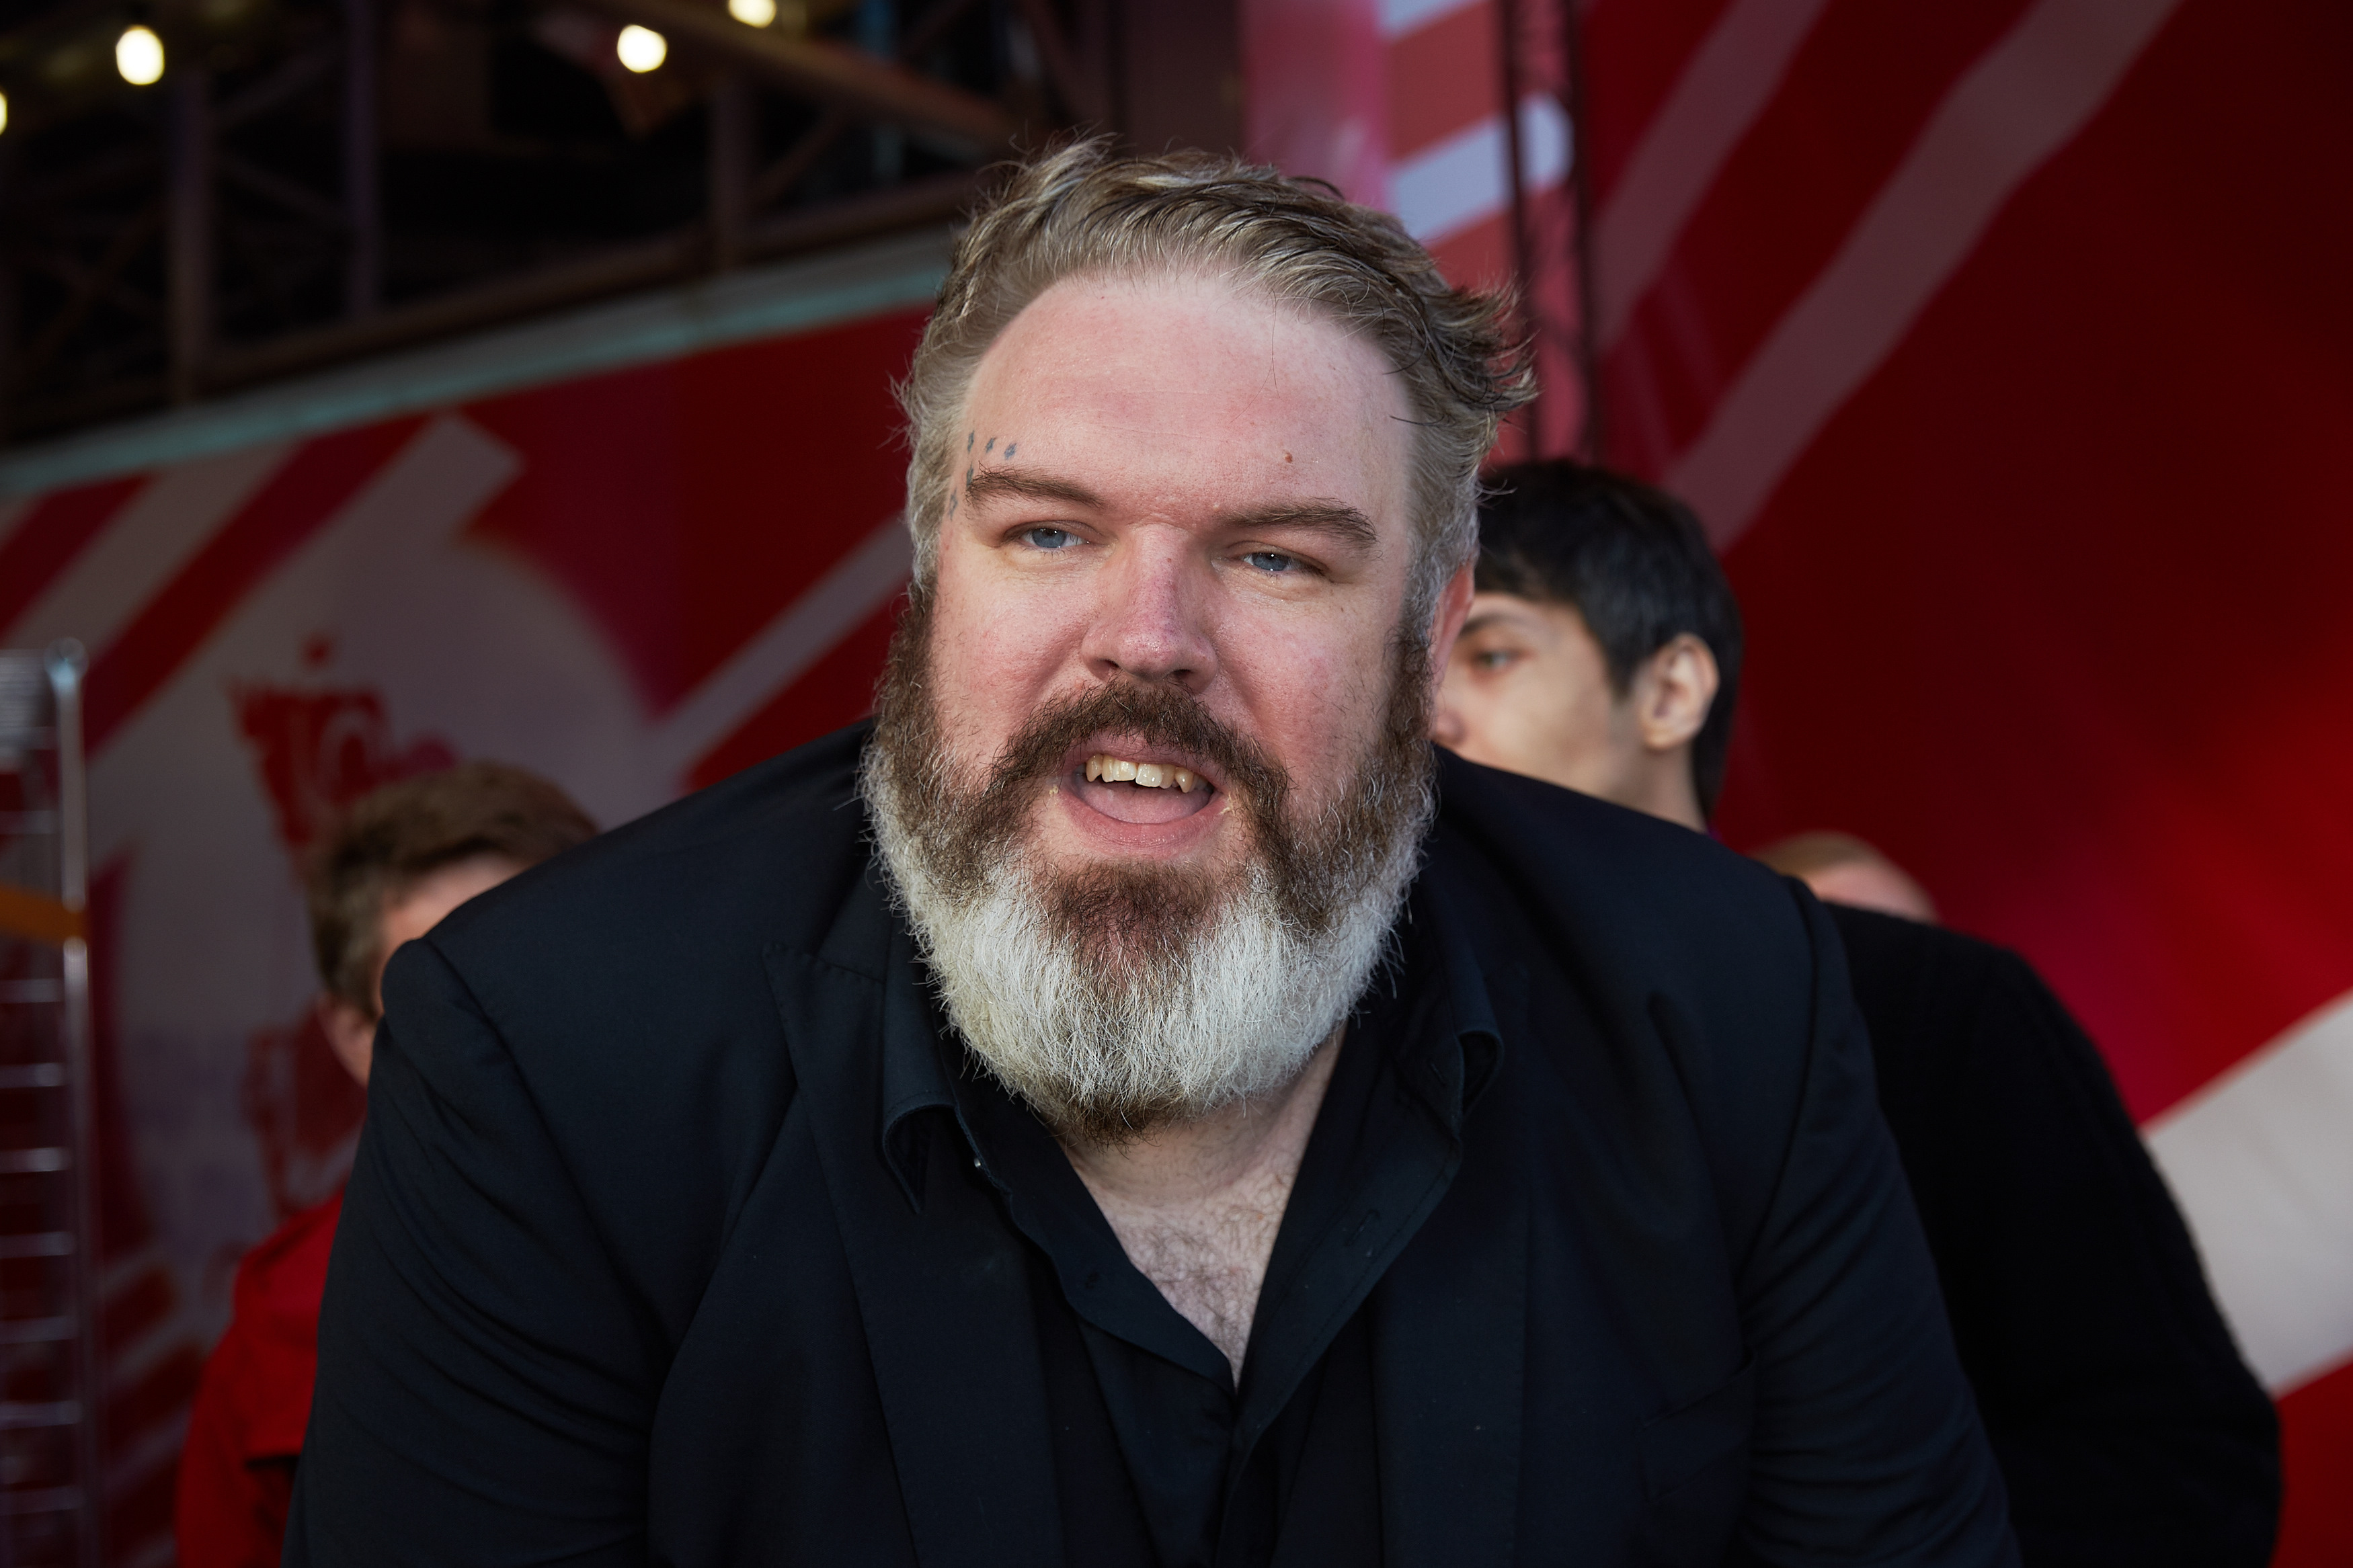 Kristian Nairn attends the Moscow International Film Festival at Pushkinsky Cinema on June 19, 2014 in Moscow, Russia. (Kommersant Photo--Kommersant via Getty Images)